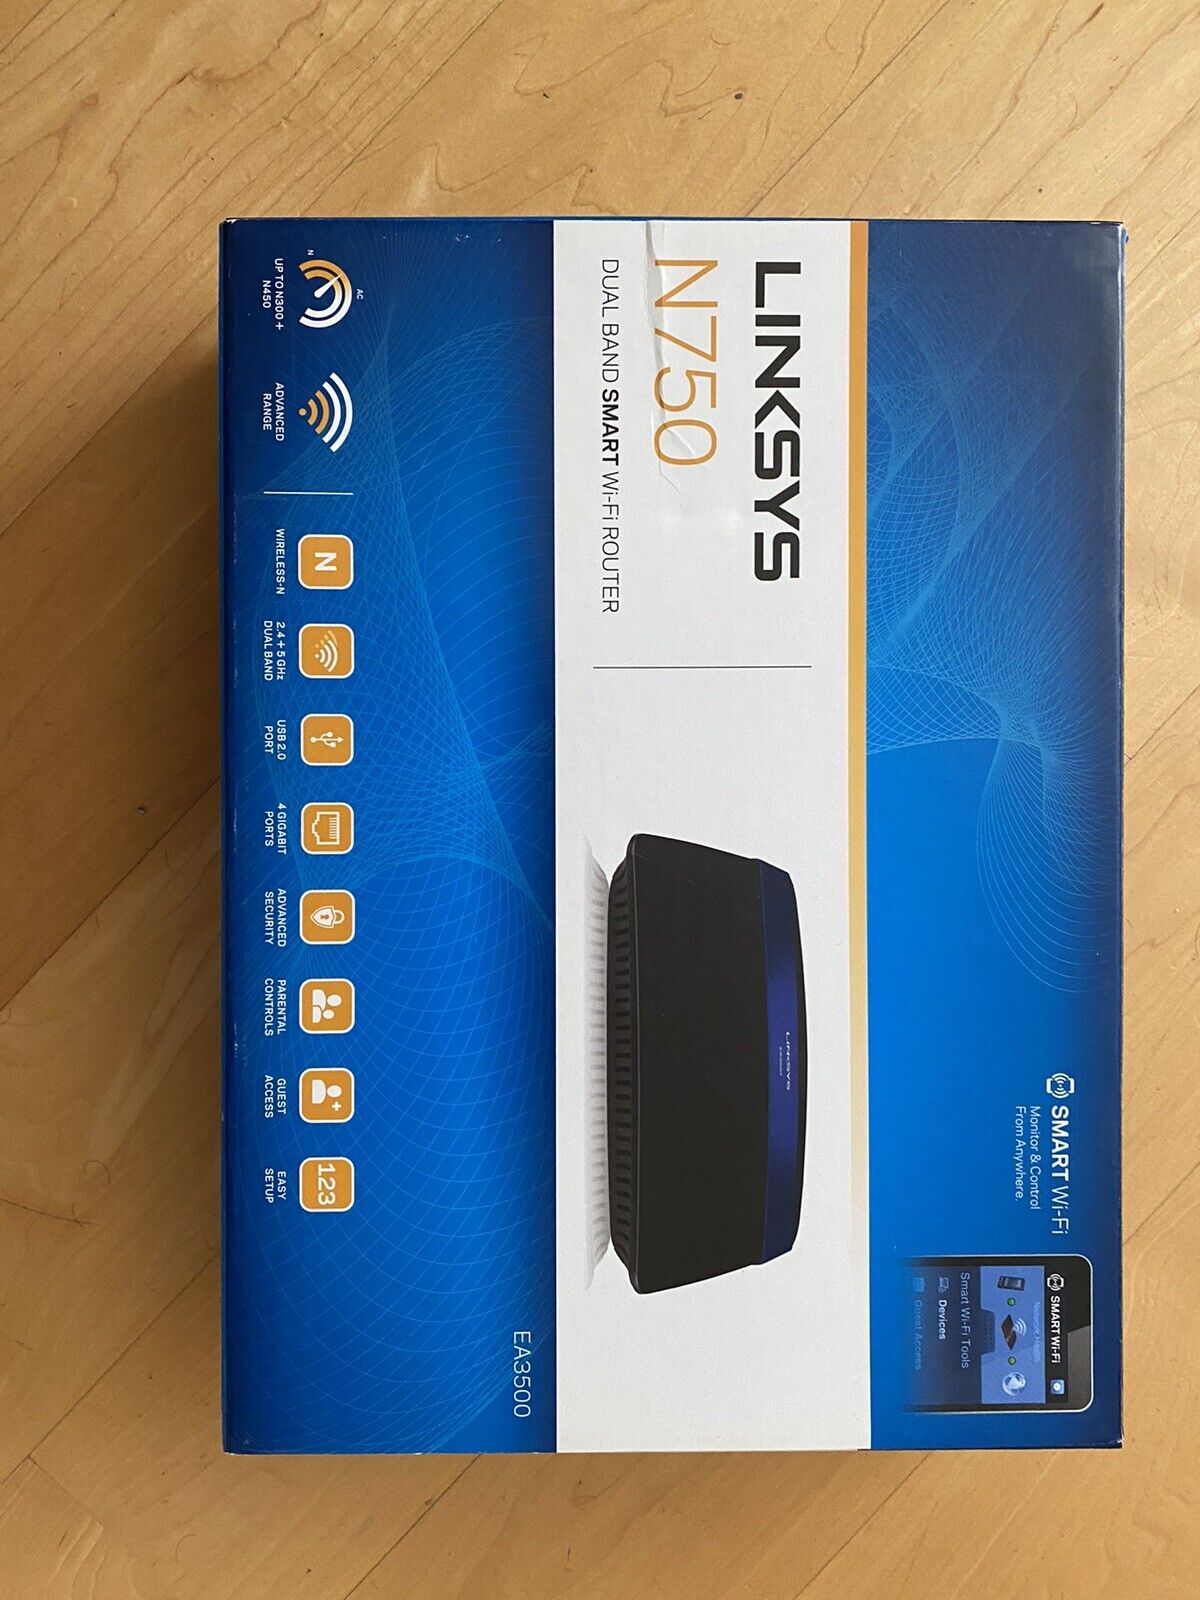 LINKSYS N750 Dual Band Smart WiFi Router. New, bundled w/ free USB Adapter